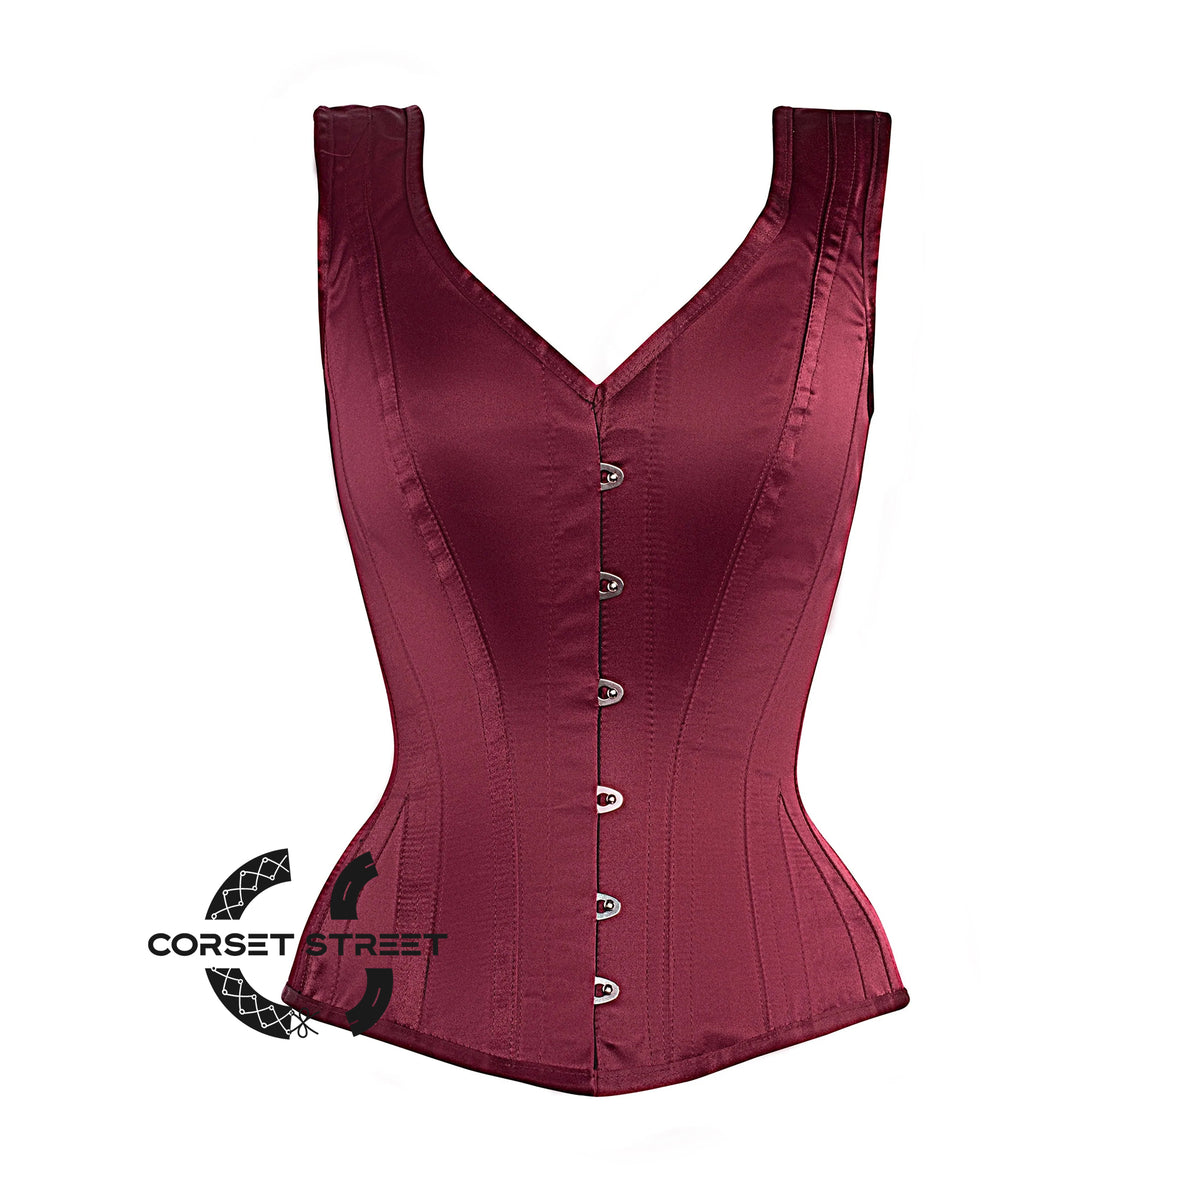 Burgundy Satin Burlesque Gothic Overbust Corset  With Shoulder Strap Bustier Top